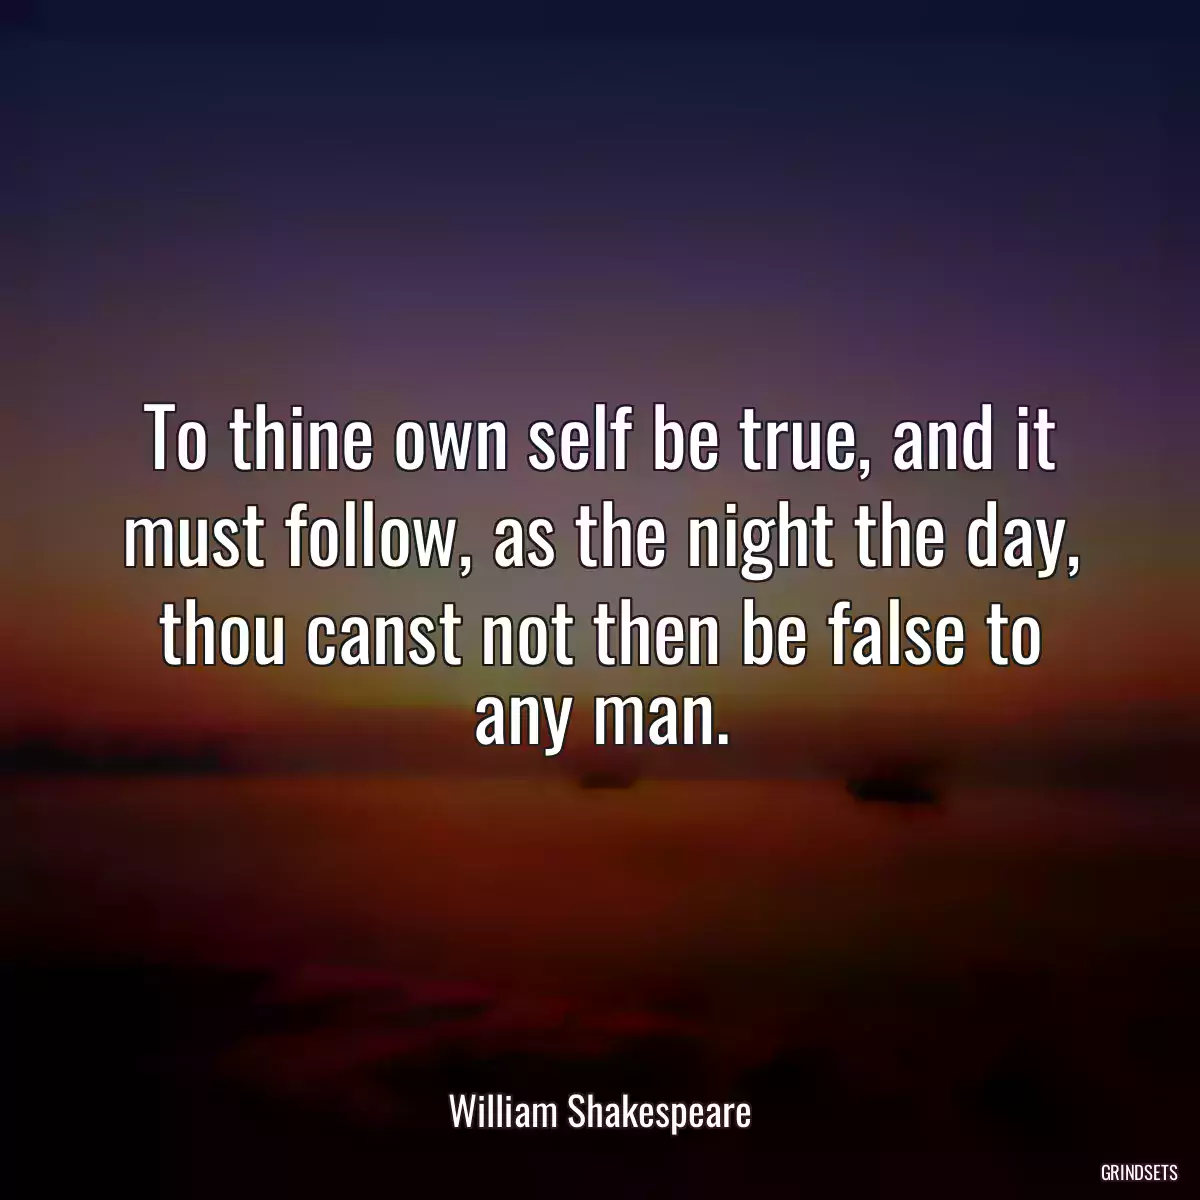 To thine own self be true, and it must follow, as the night the day, thou canst not then be false to any man.